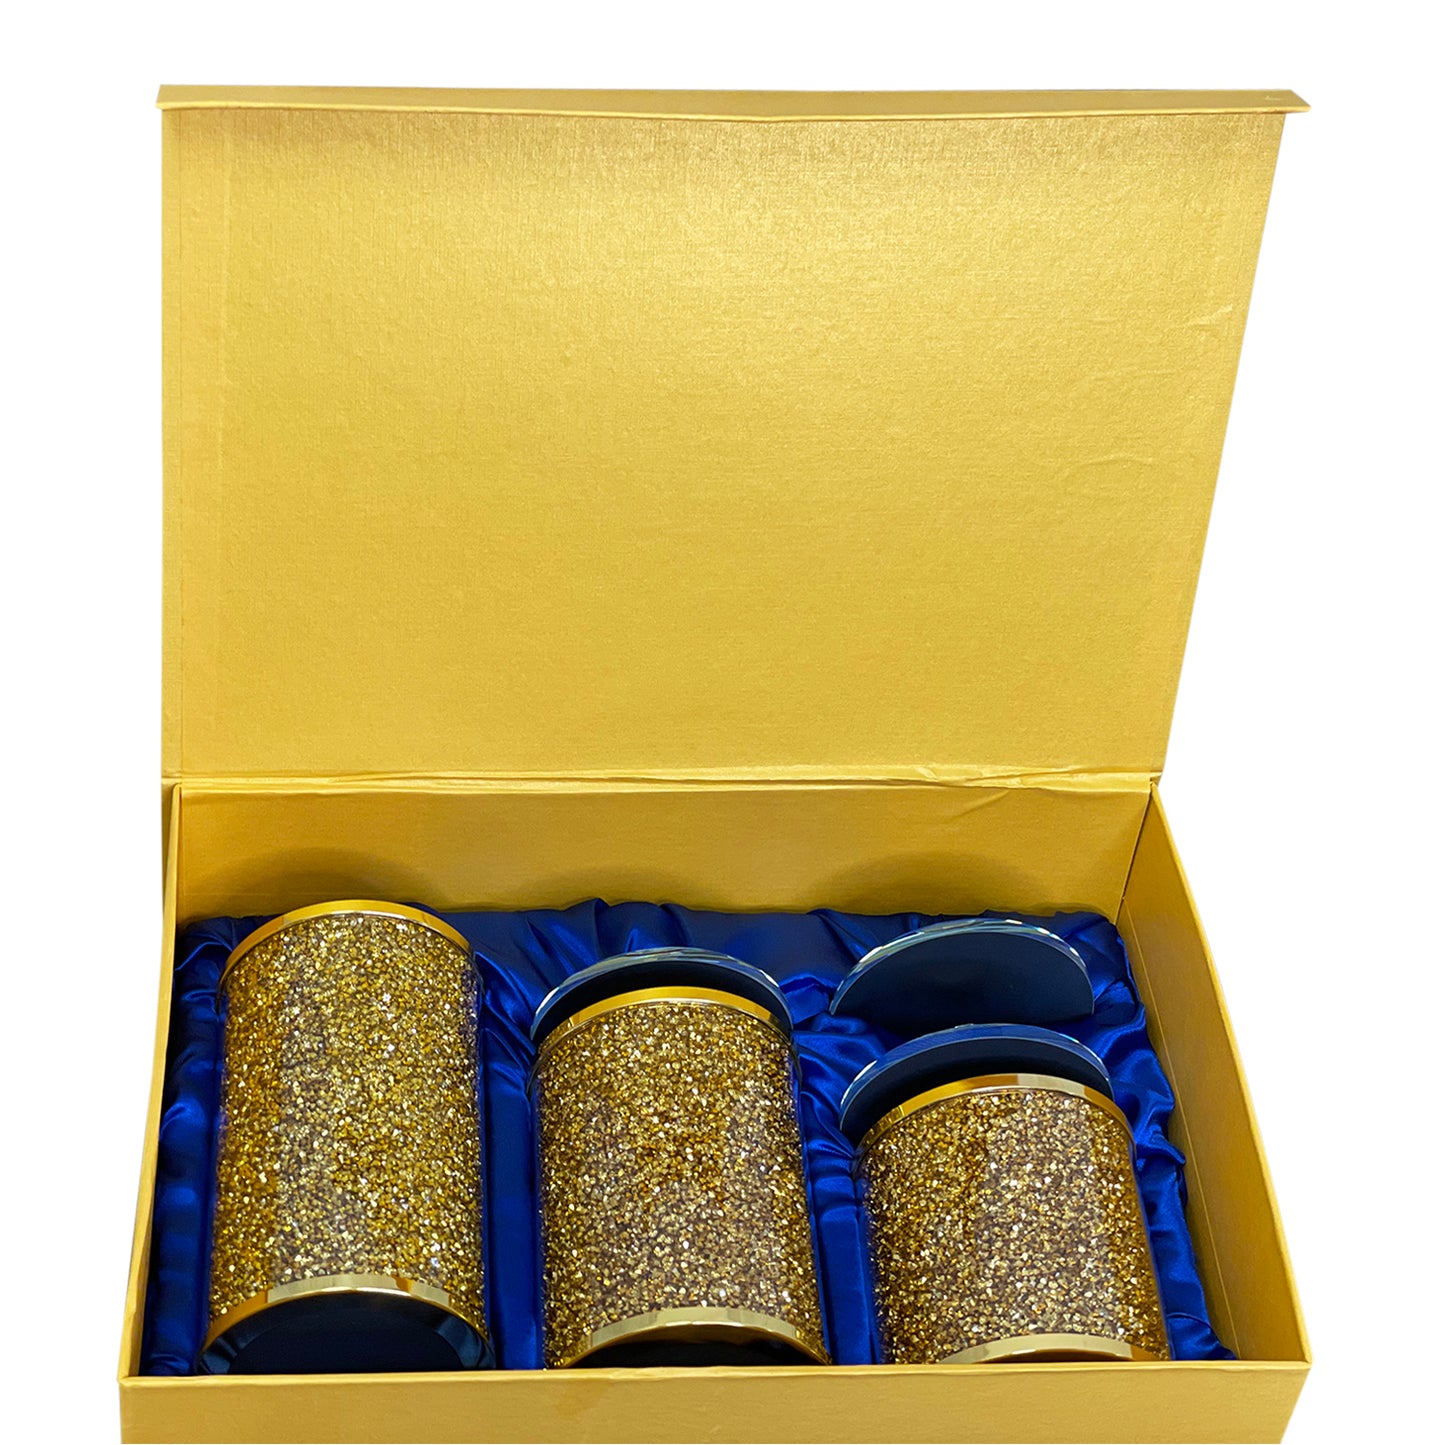 Ambrose Exquisite Three Glass Canister Set in Gift Box